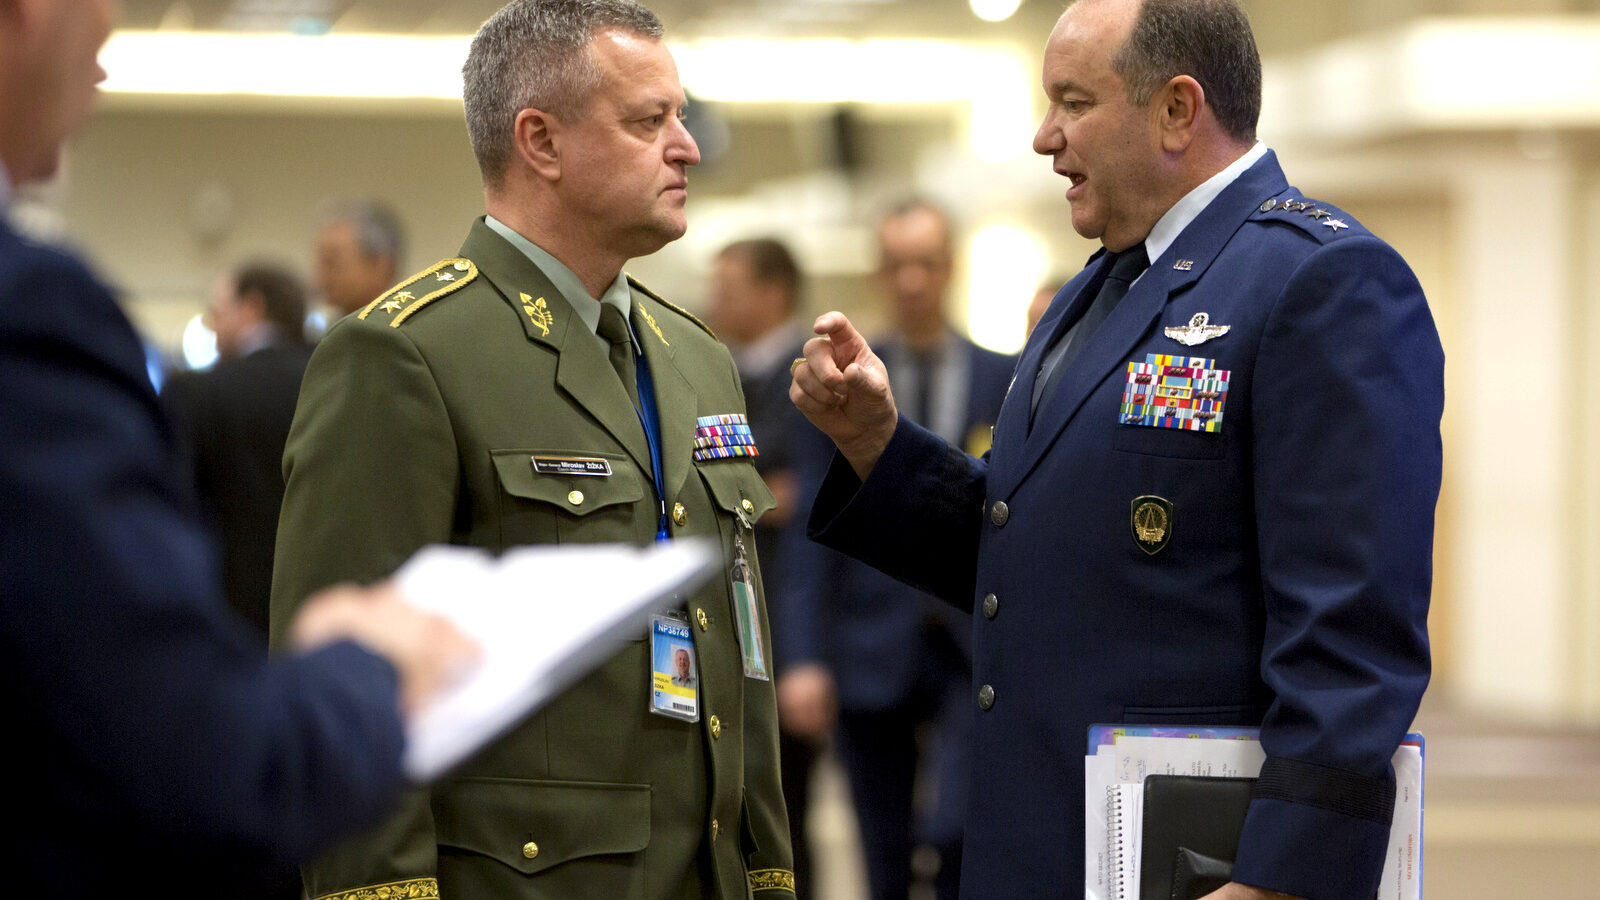 Supreme Allied Commander Europe, Gen. Philip Breedlove, right, speaks with Czech Republic's NATO-EU military representative Maj. Gen. Miroslav Zizka, center, prior to a meeting at NATO headquarters in Brussels on Wednesday, Feb. 10, 2016. NATO defense ministers convene a two-day meeting to discuss current defense issues and whether the Alliance should take a more direct role in dealing with its gravest migrant crisis since WWII. (AP Photo/Virginia Mayo, Pool)